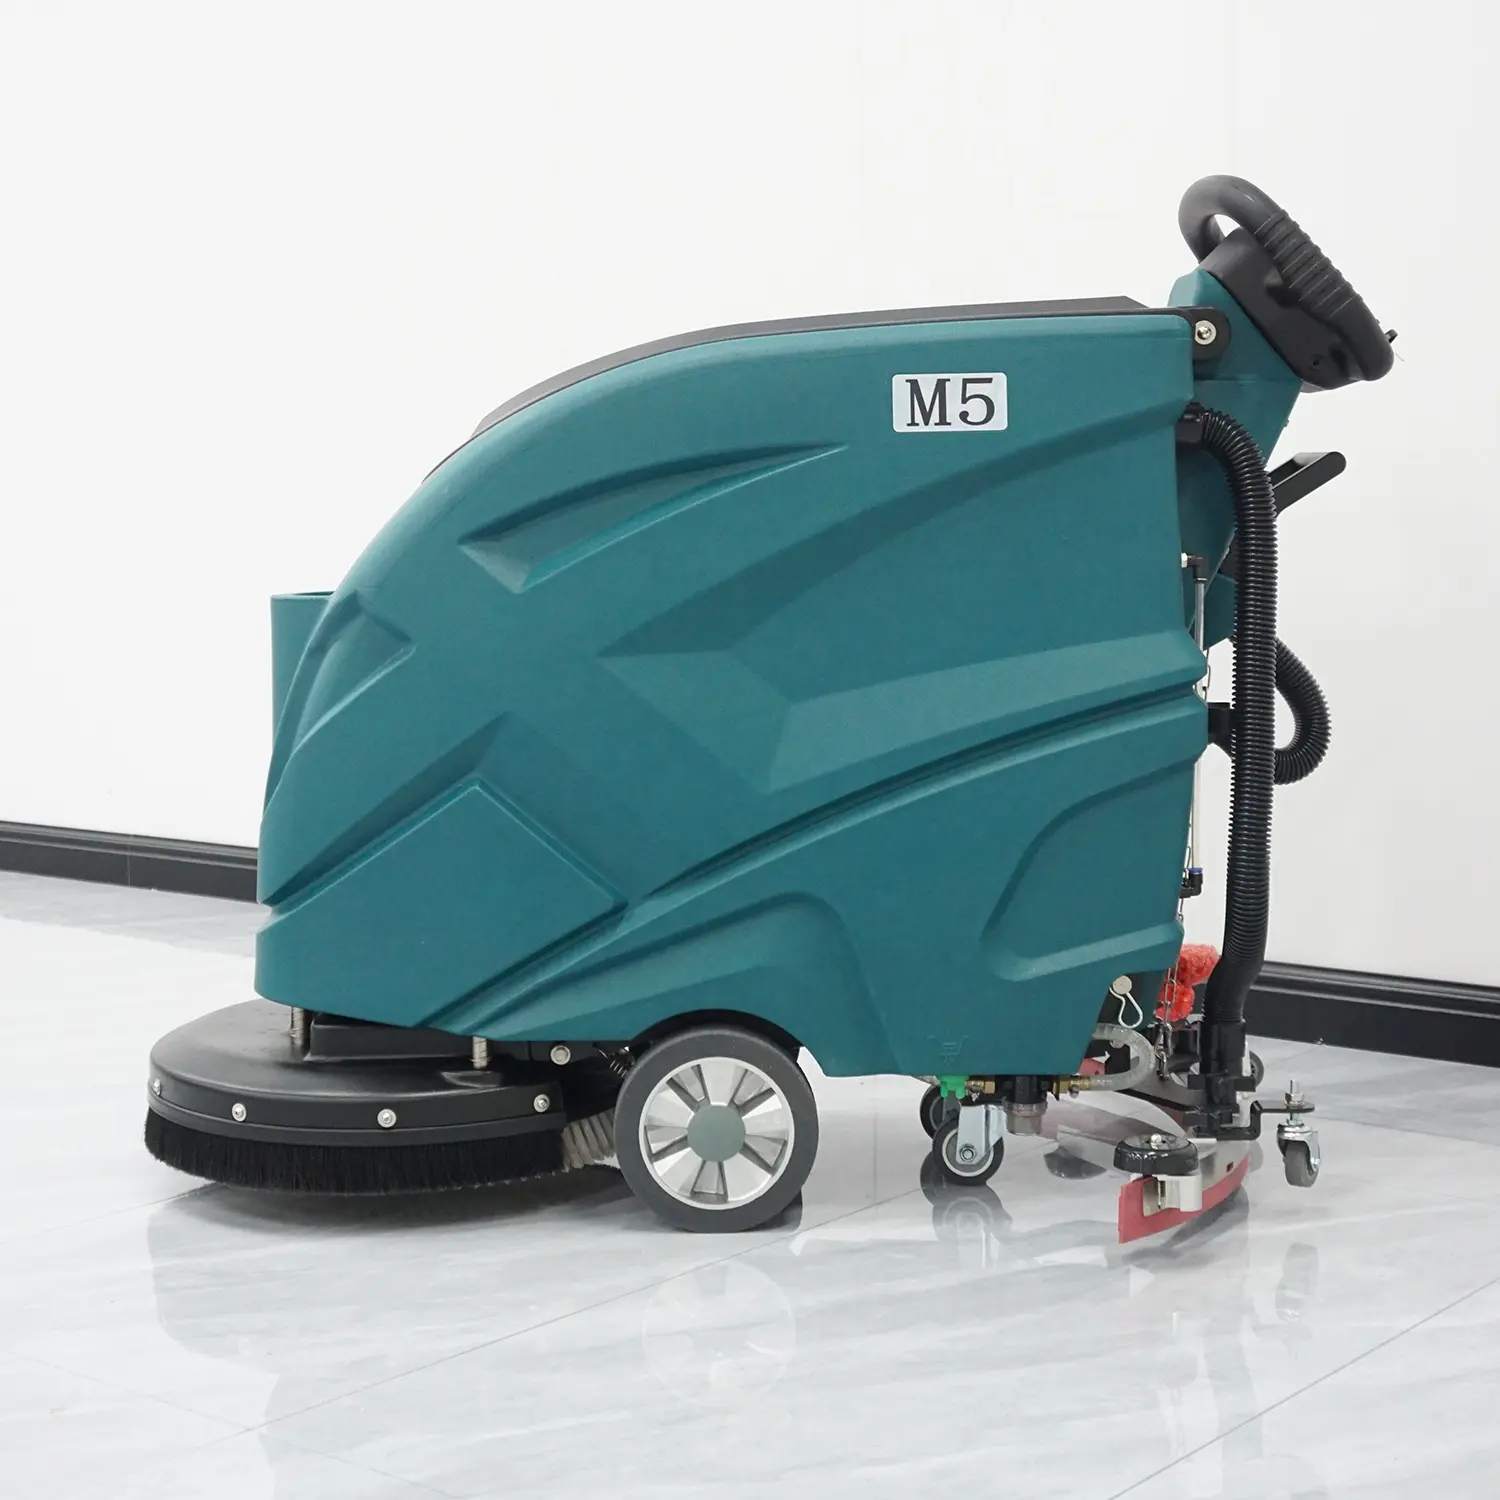 Best quality hand push walk behind floor cleaning machine professional industrial commercial floor scrubber